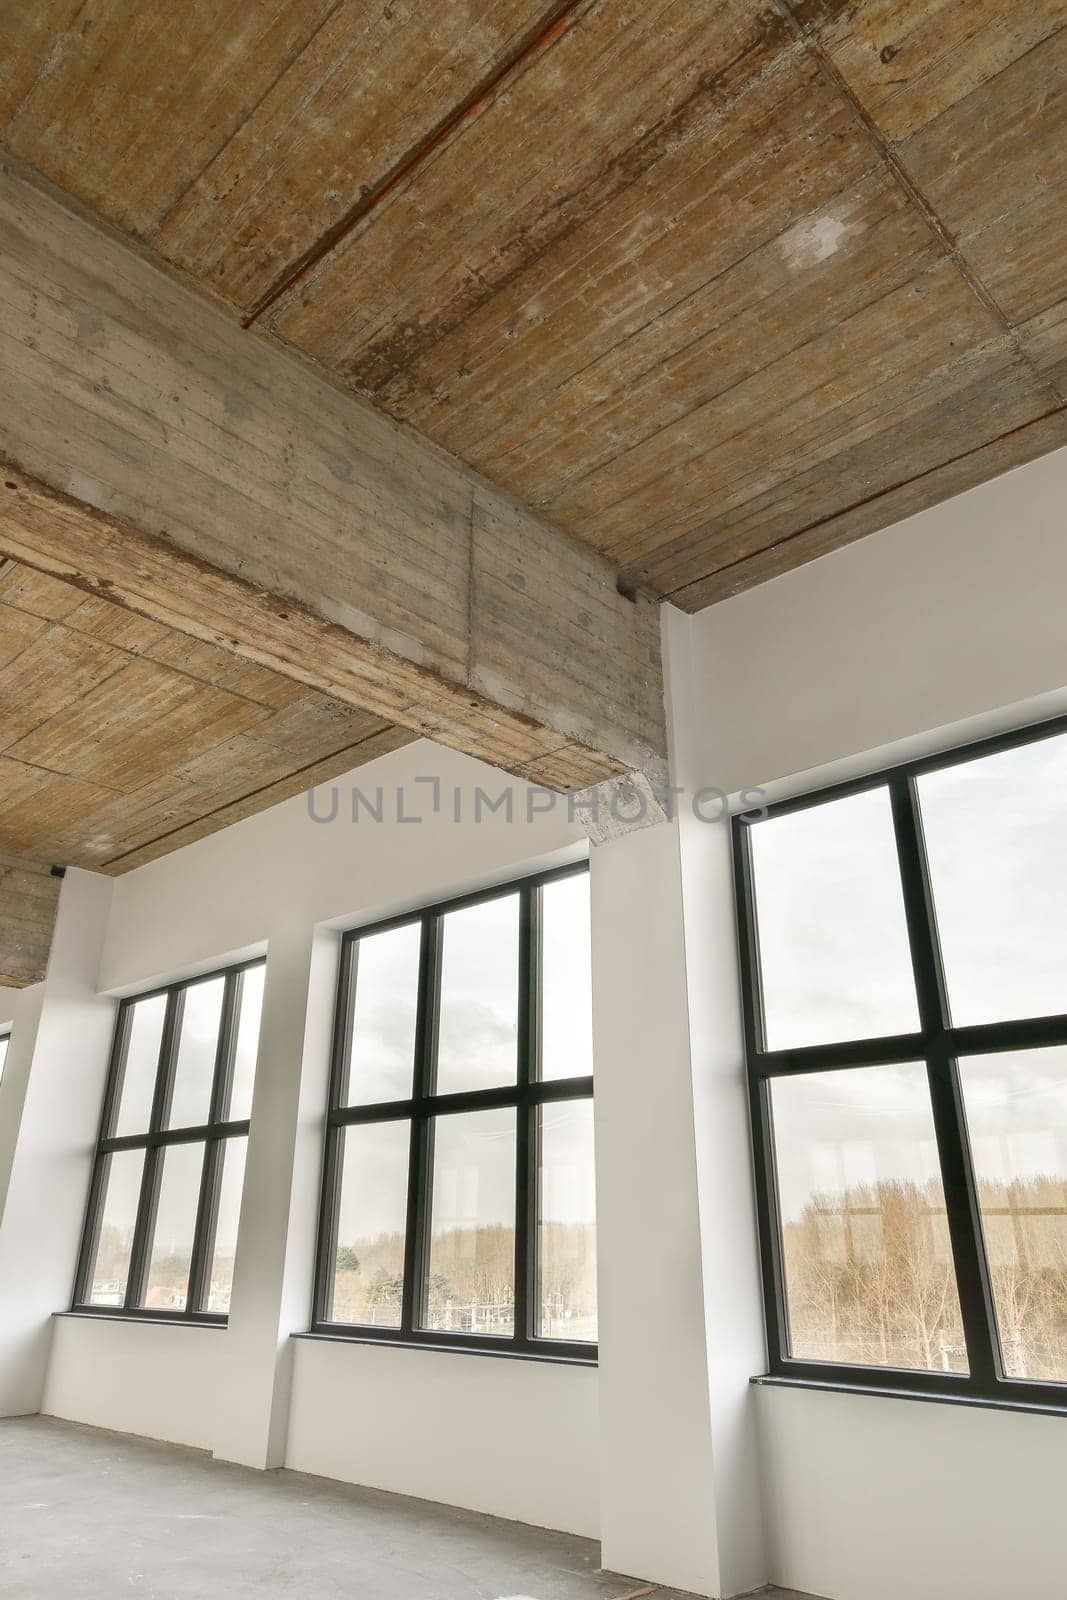 an empty room with large windows and wood planks on the ceiling that has been stripped down to make way for new flooring